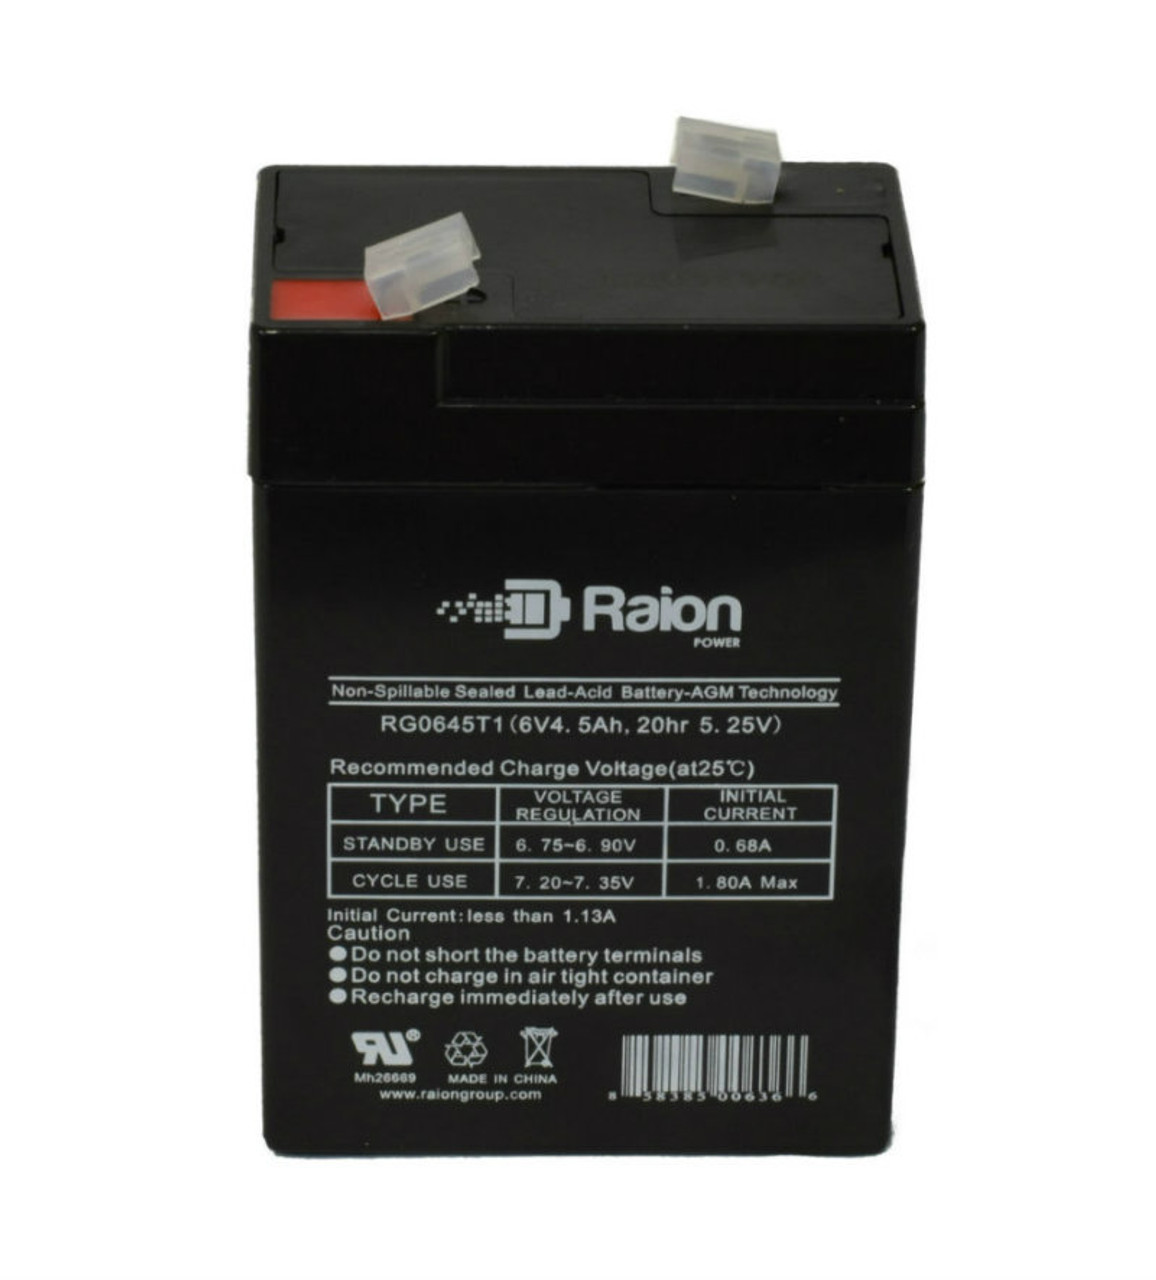 Raion Power RG0645T1 Replacement Battery Cartridge for Cas Medical 9000 Blood Pressure Monitor